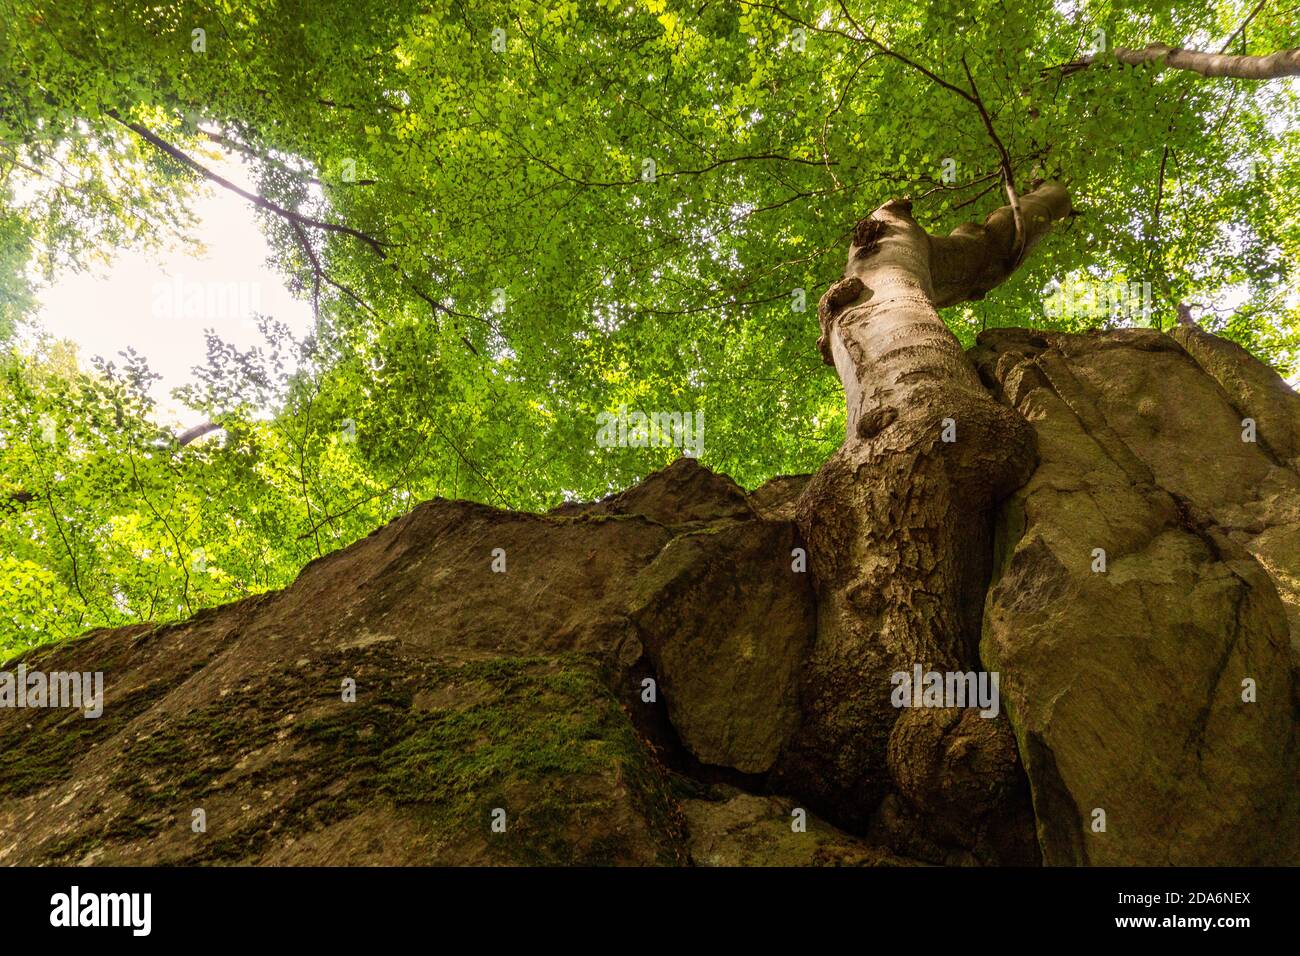 Tree grows out of rock crack in summer forest Stock Photo